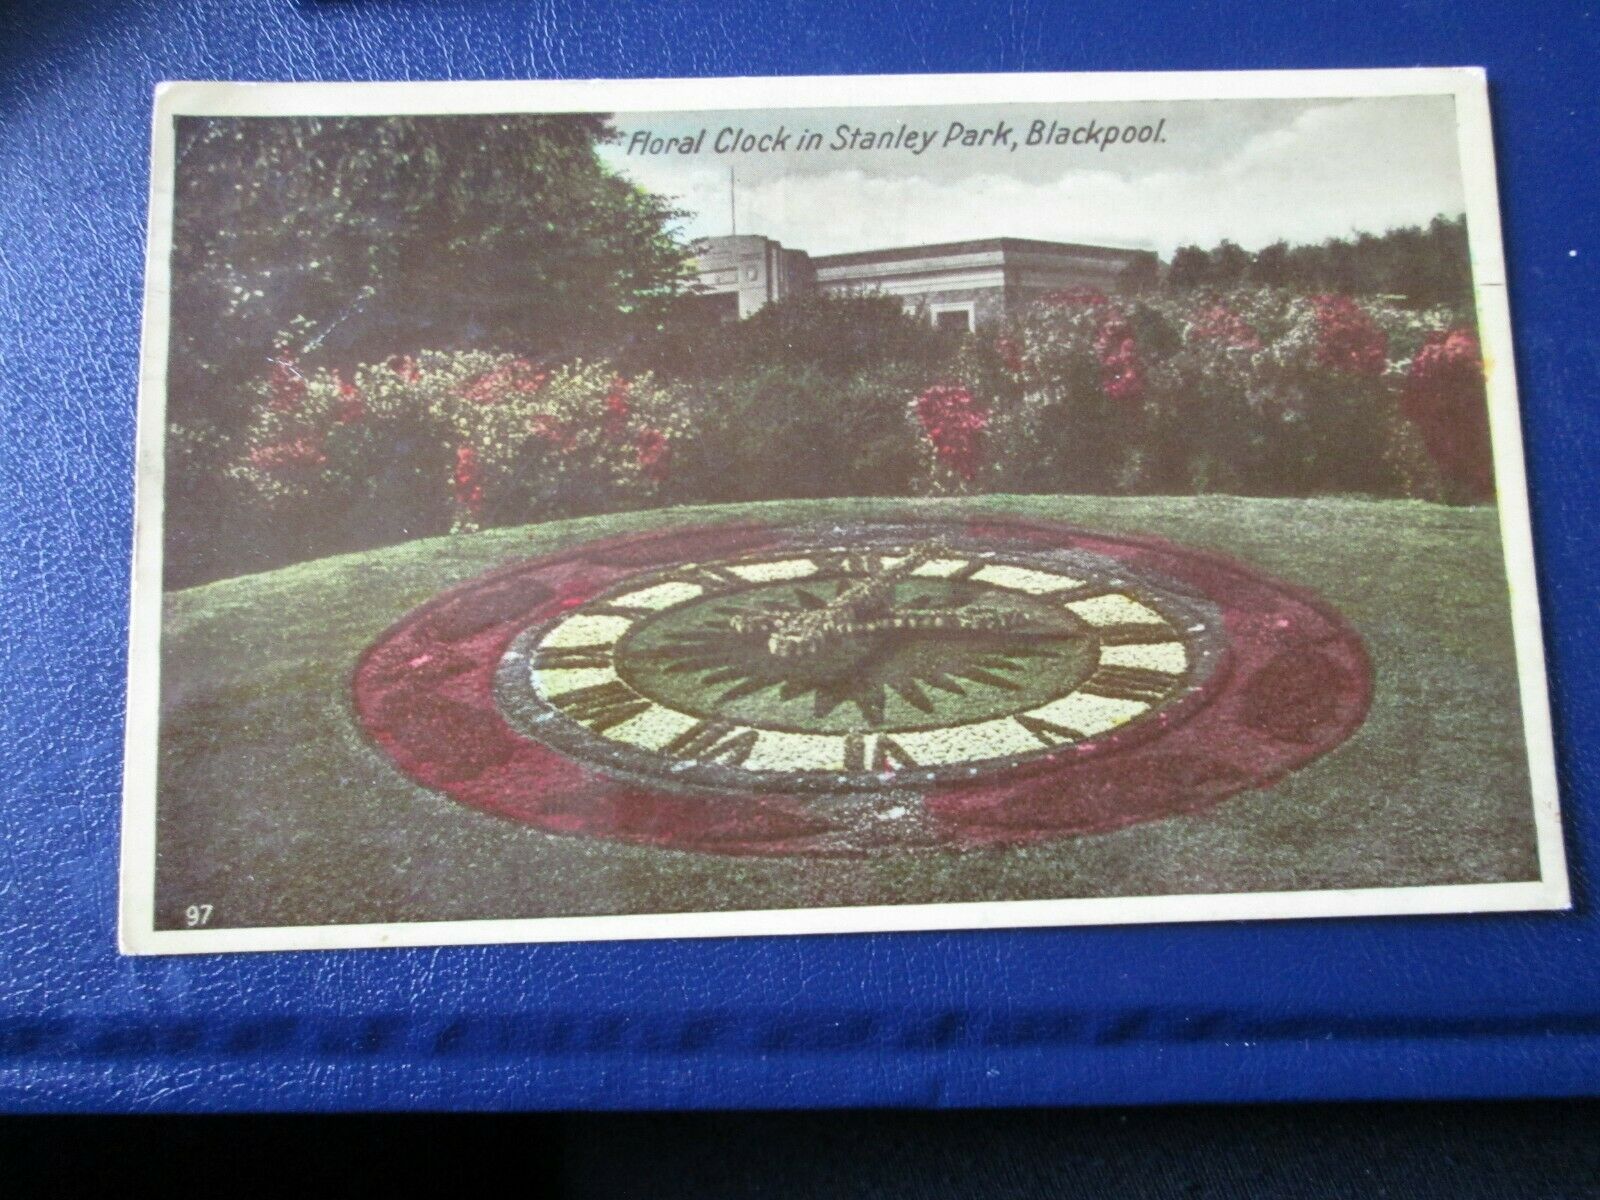 House Clearance - Service of Floral Clock in Stanley Park, Blackpool (1941 posted)